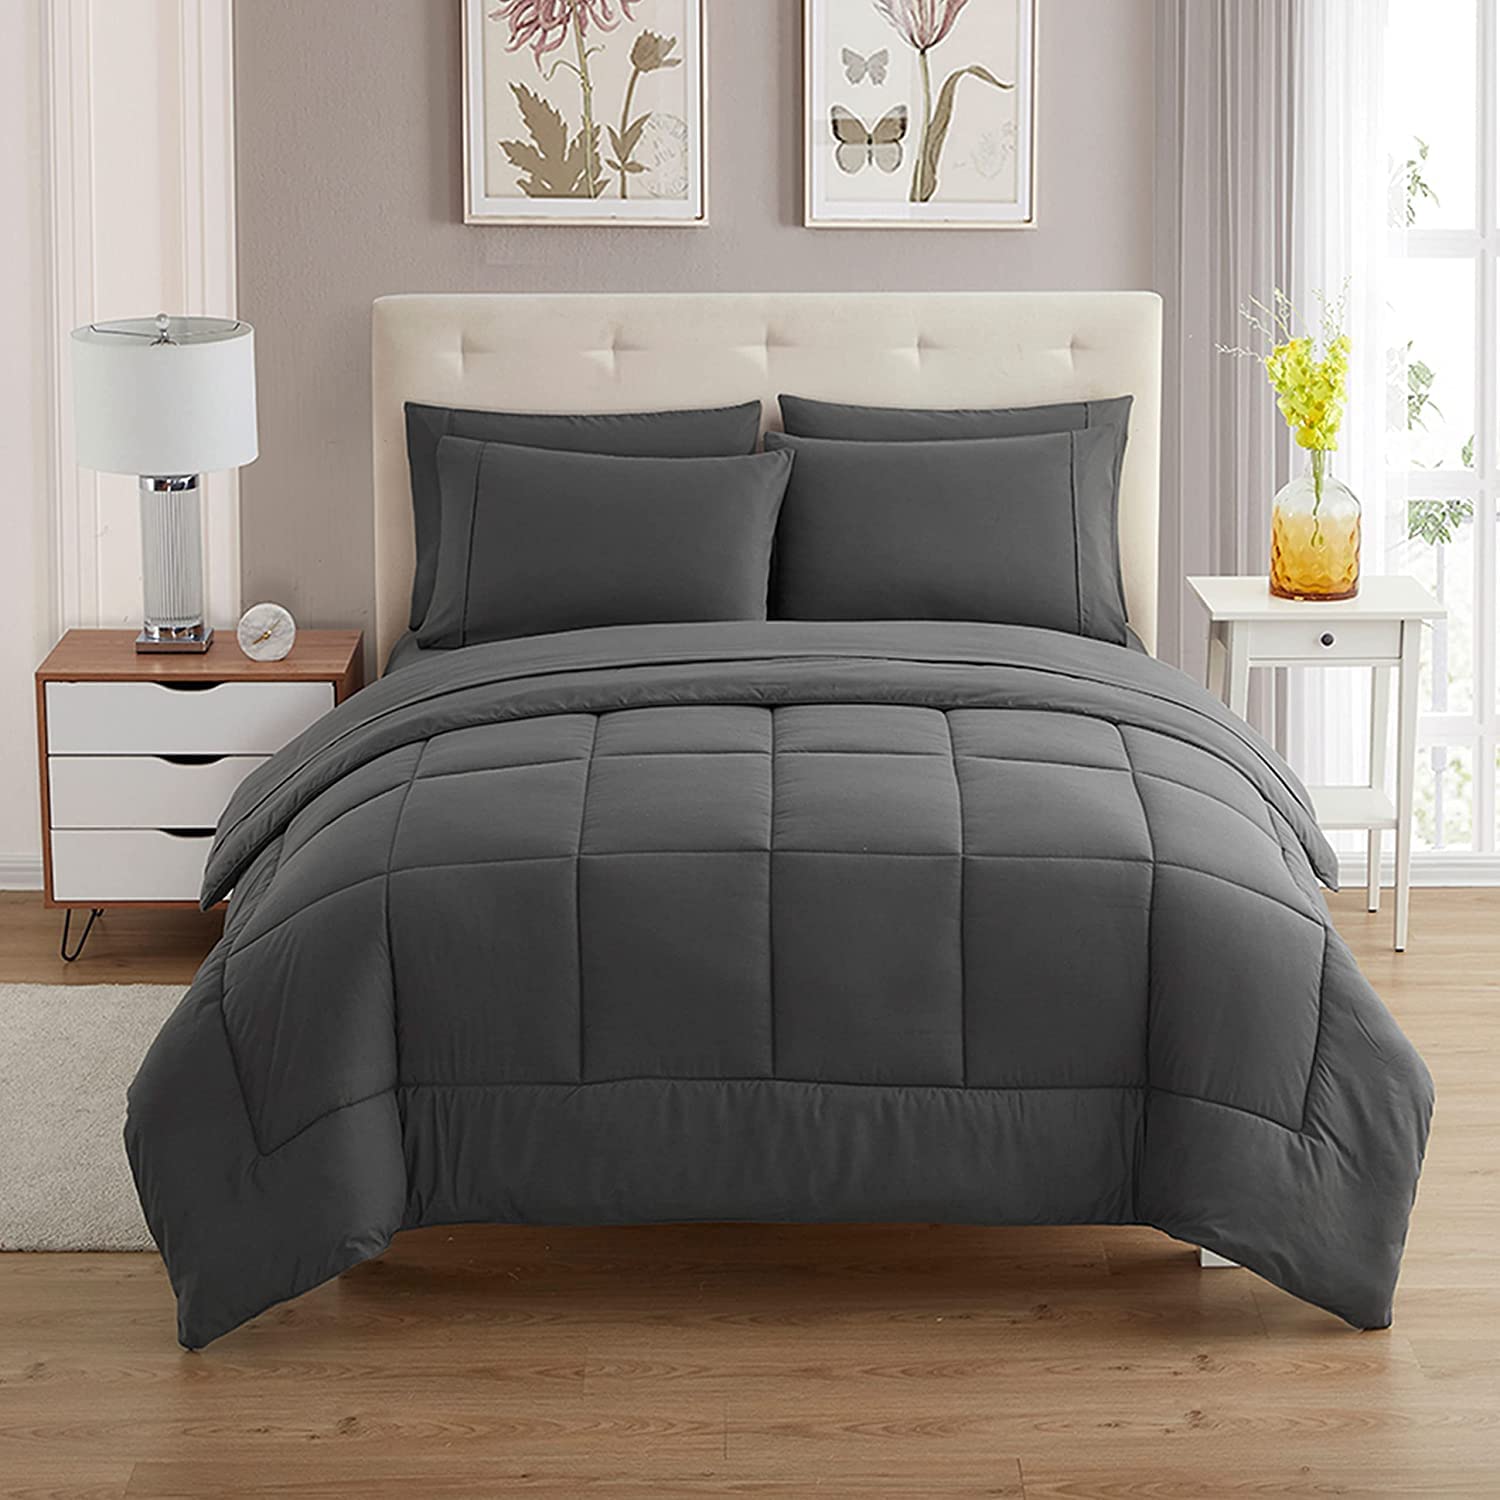 Book Cover Sweet Home Collection 8 Piece Comforter Set Bag Solid Color All Season Soft Down Alternative Blanket & Luxurious Microfiber Bed Sheets, Gray, Queen Gray Queen